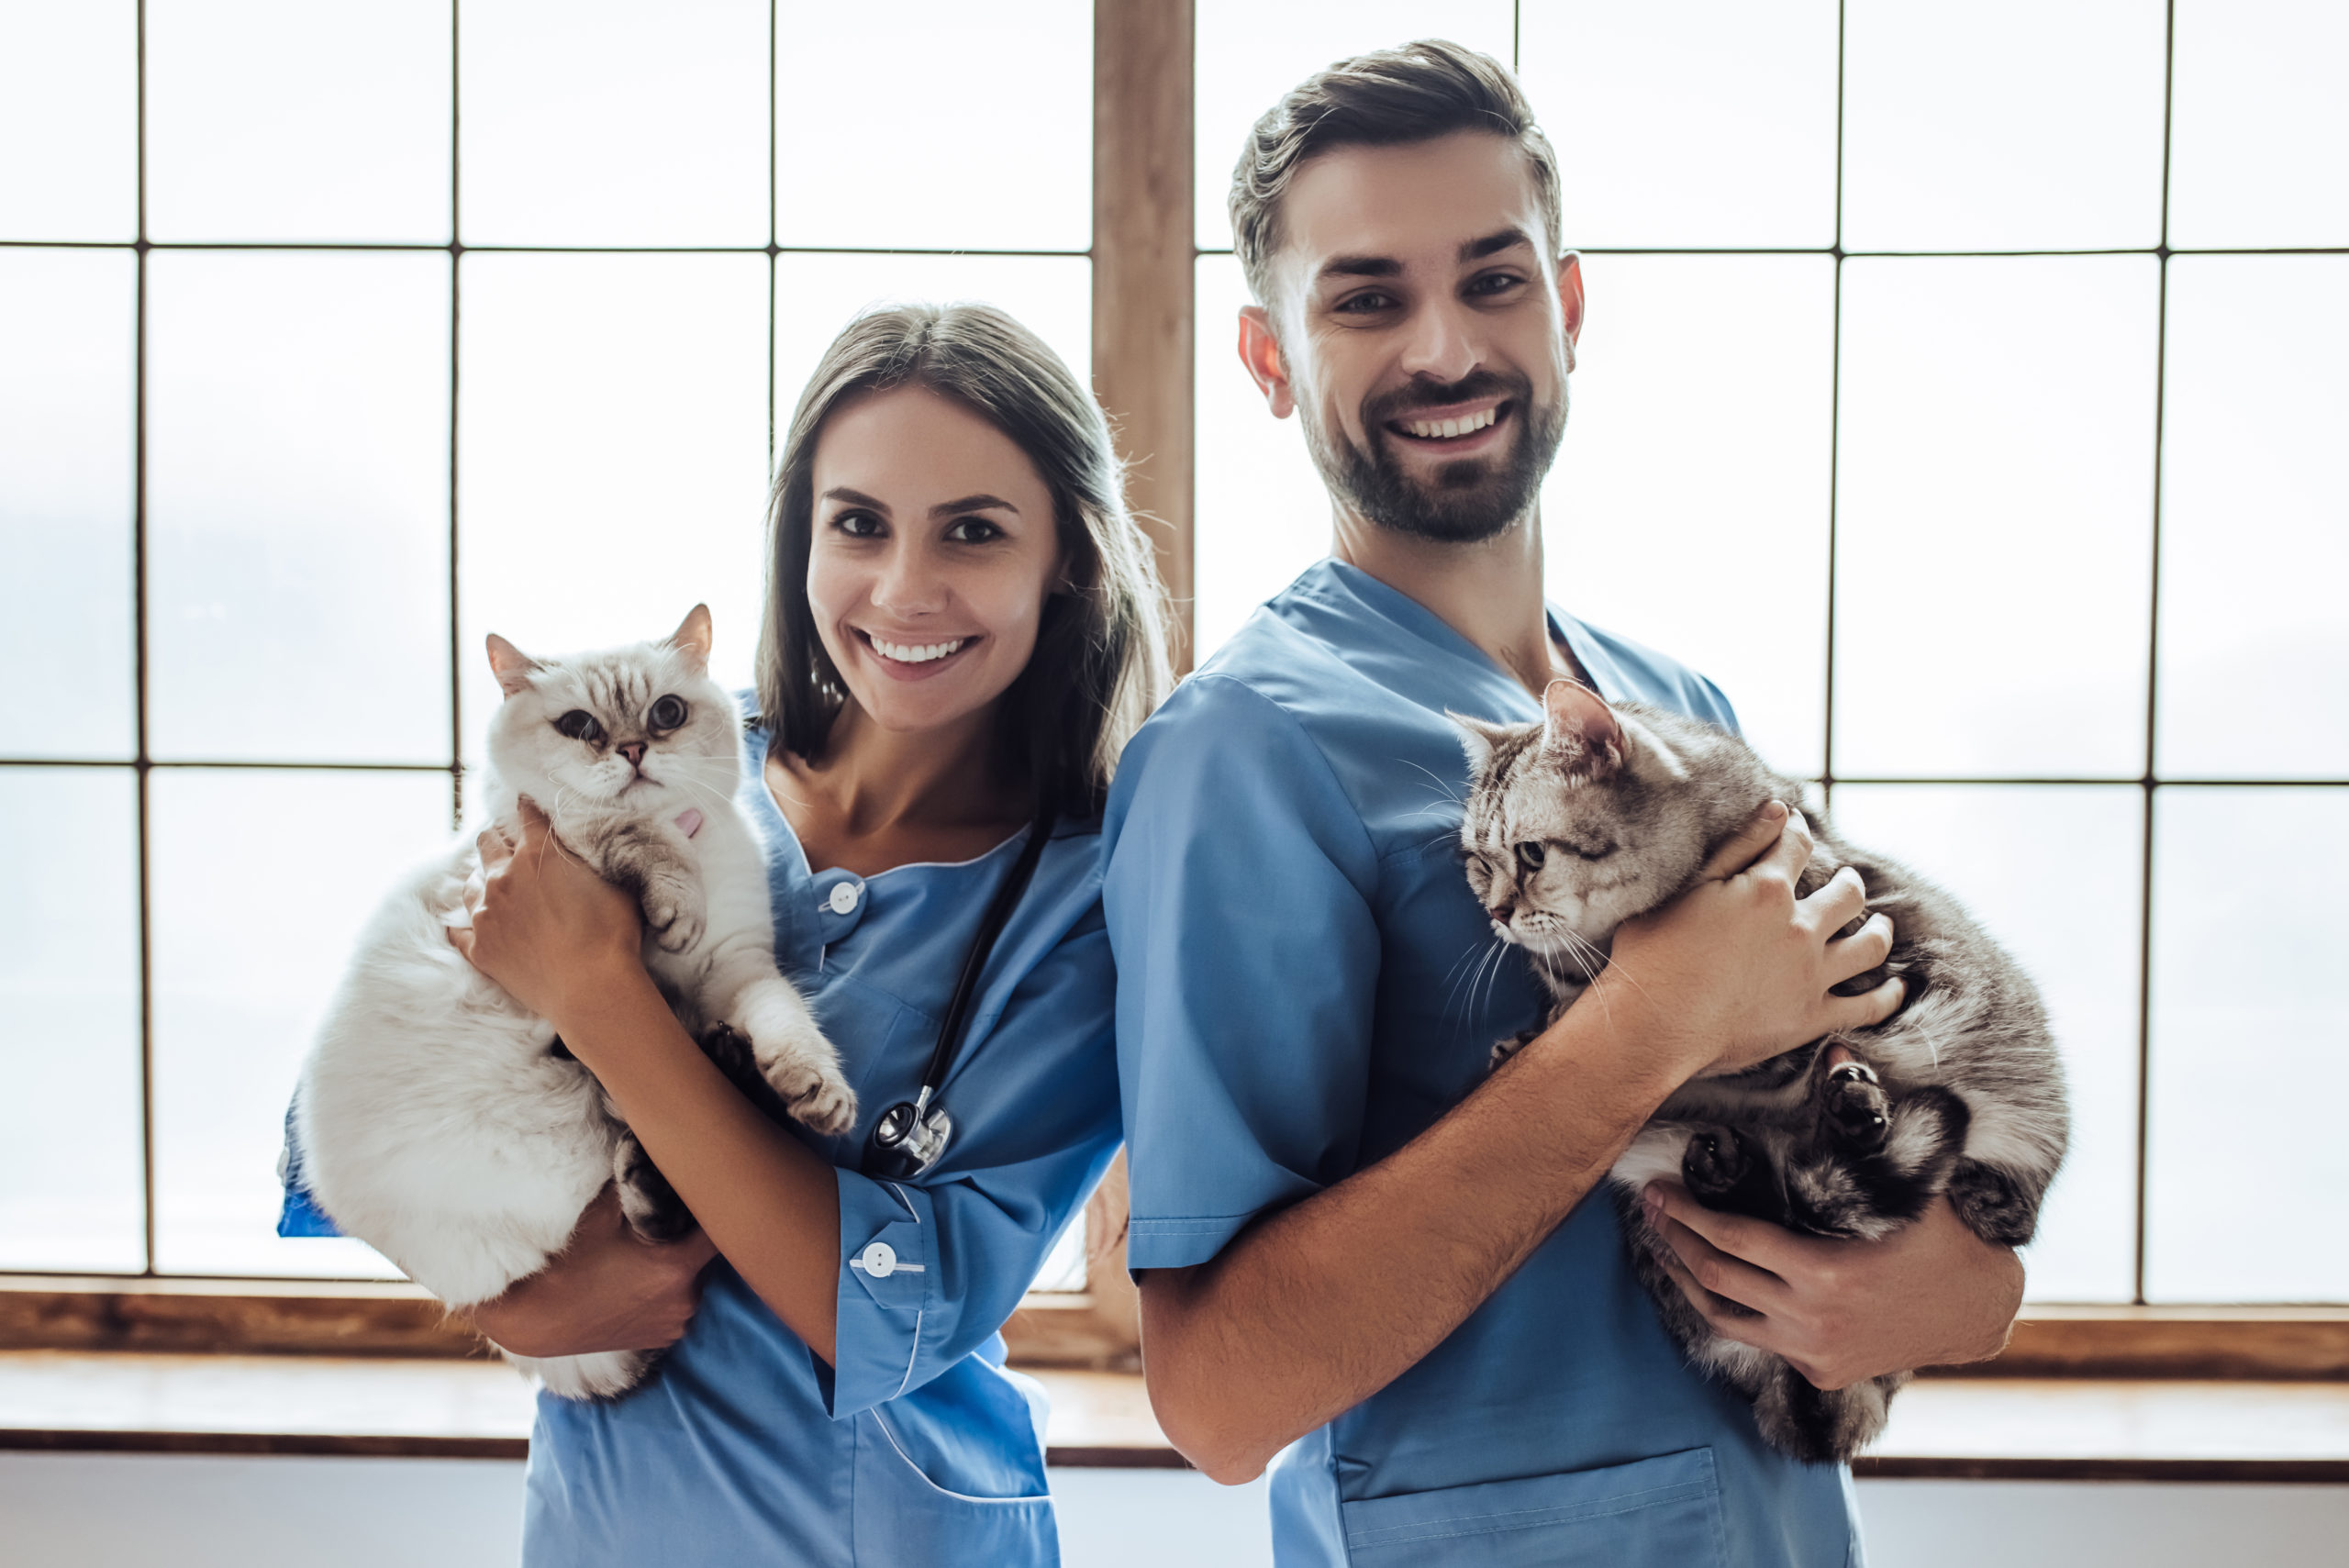 Other suggestions for improving the well-being of the team in the future Veterinary Hospital